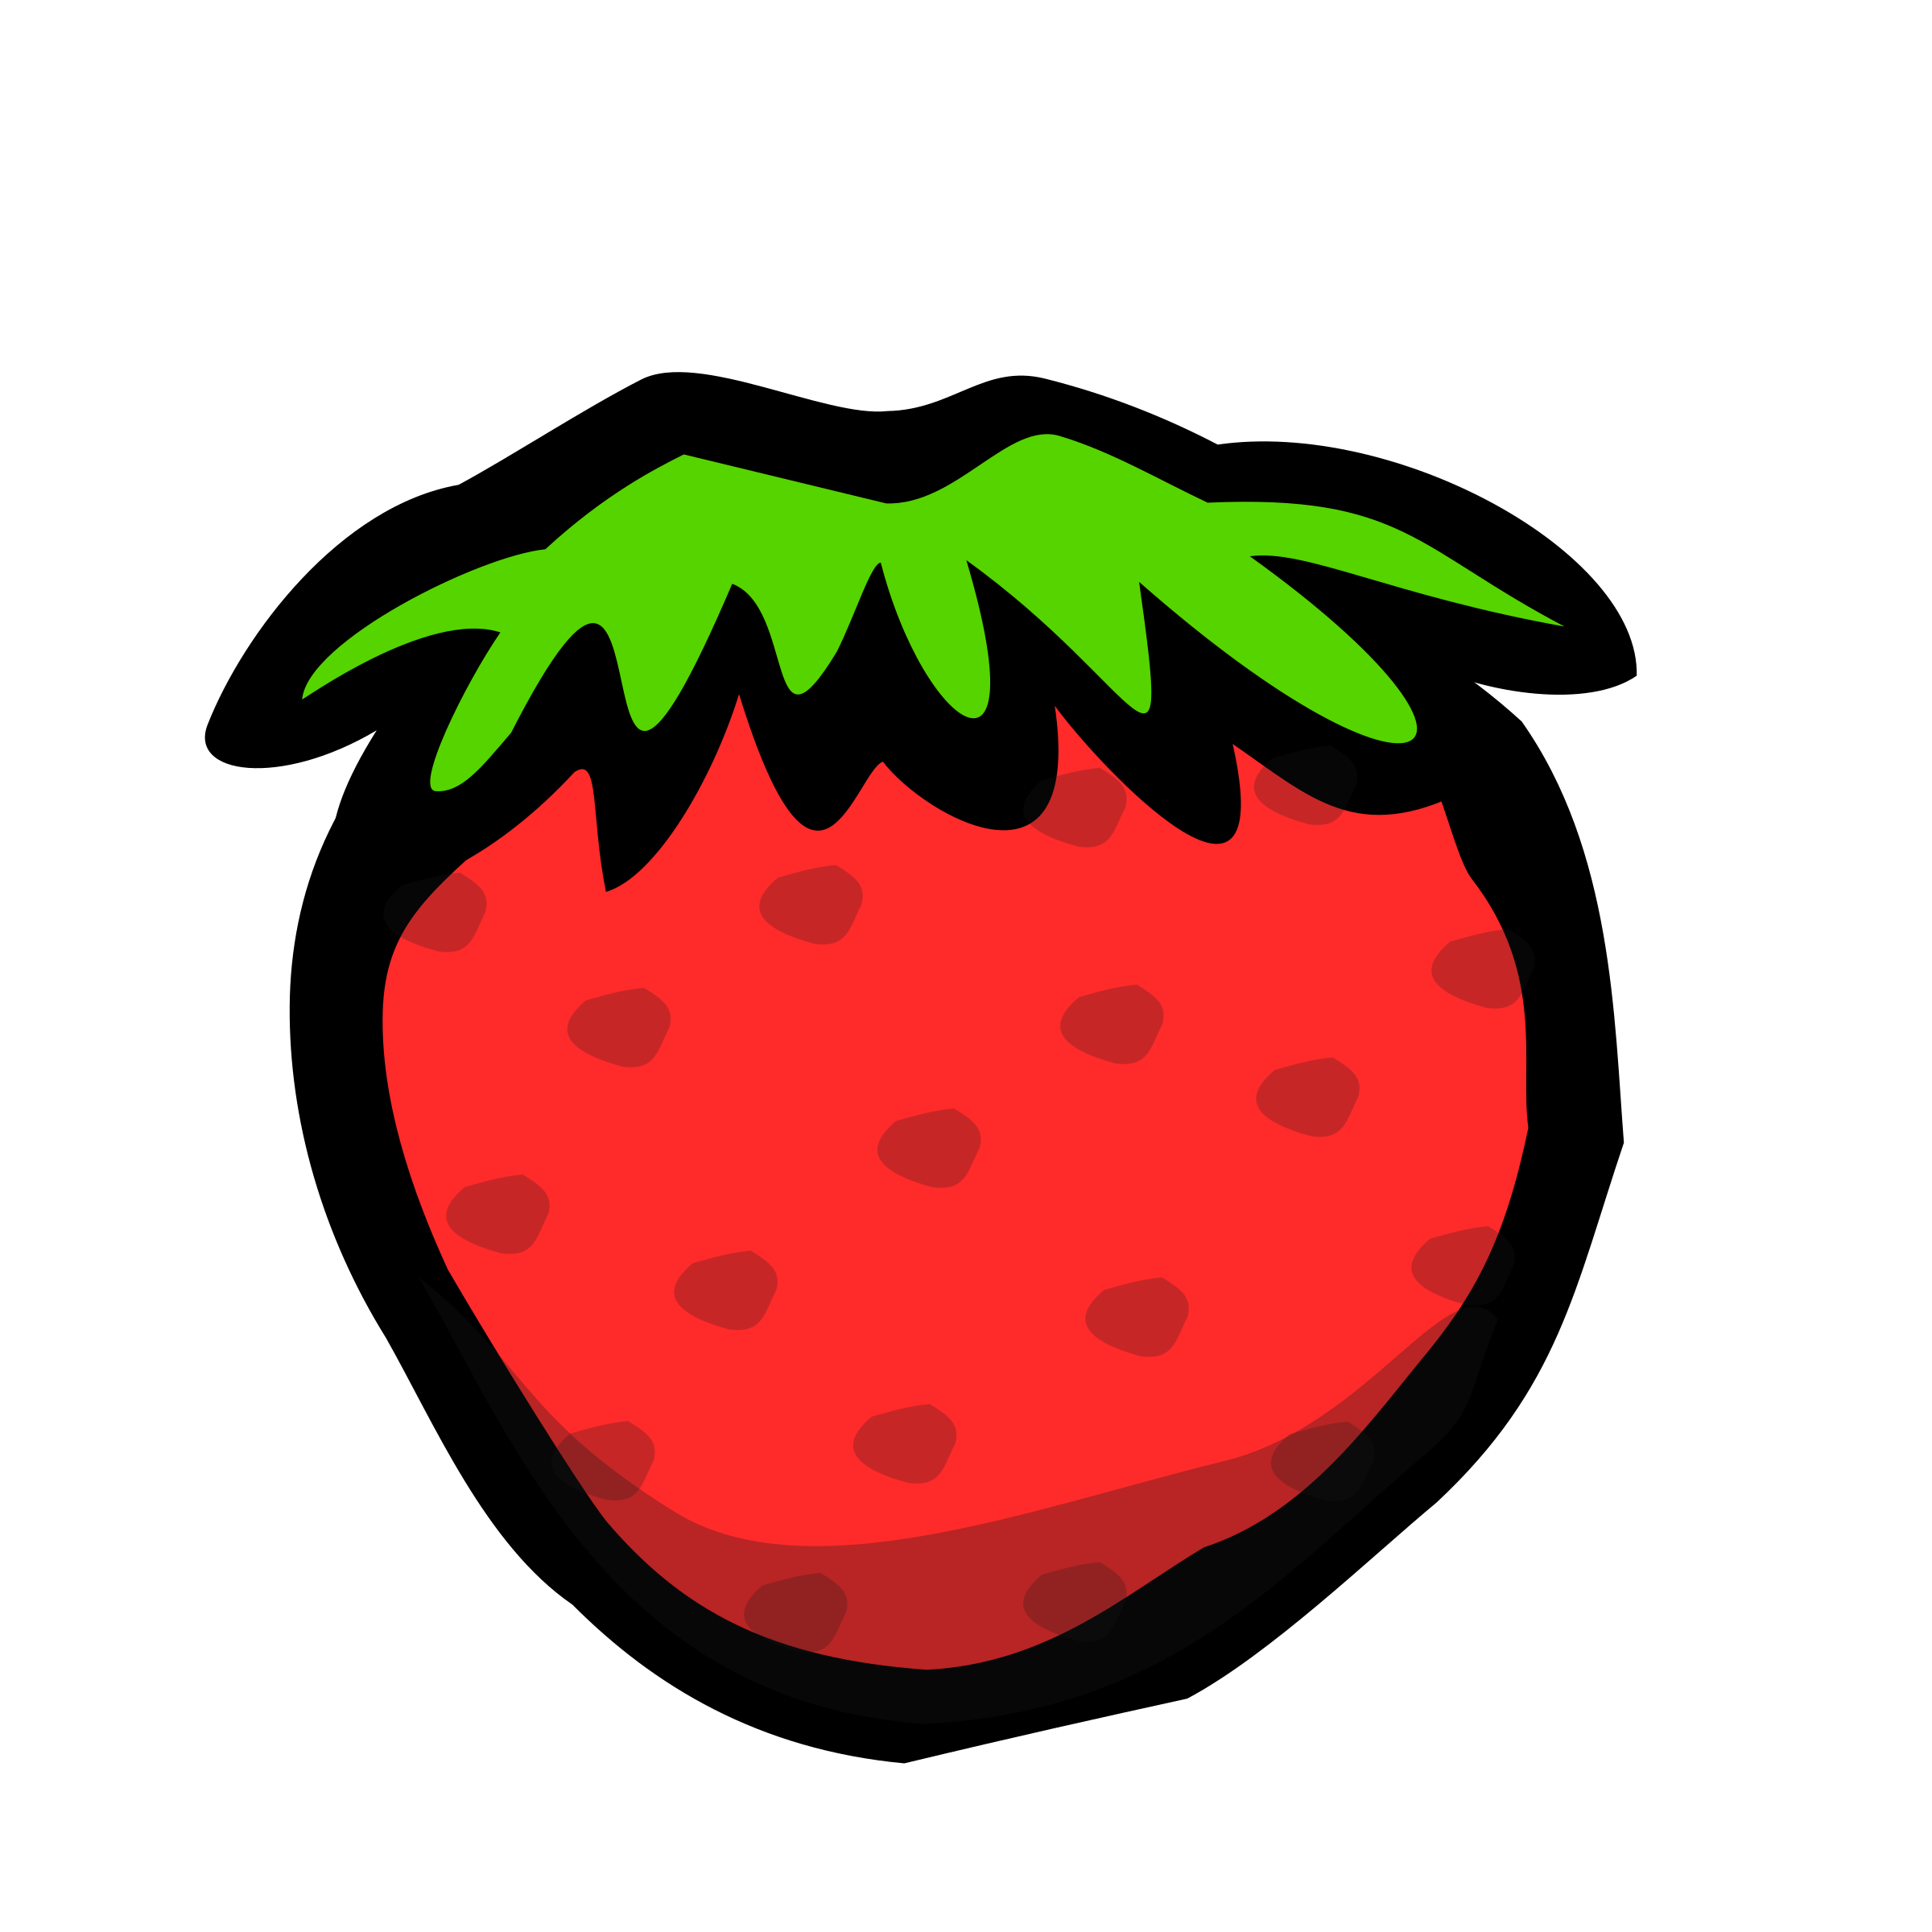 Big image png. Watermelon clipart strawberry